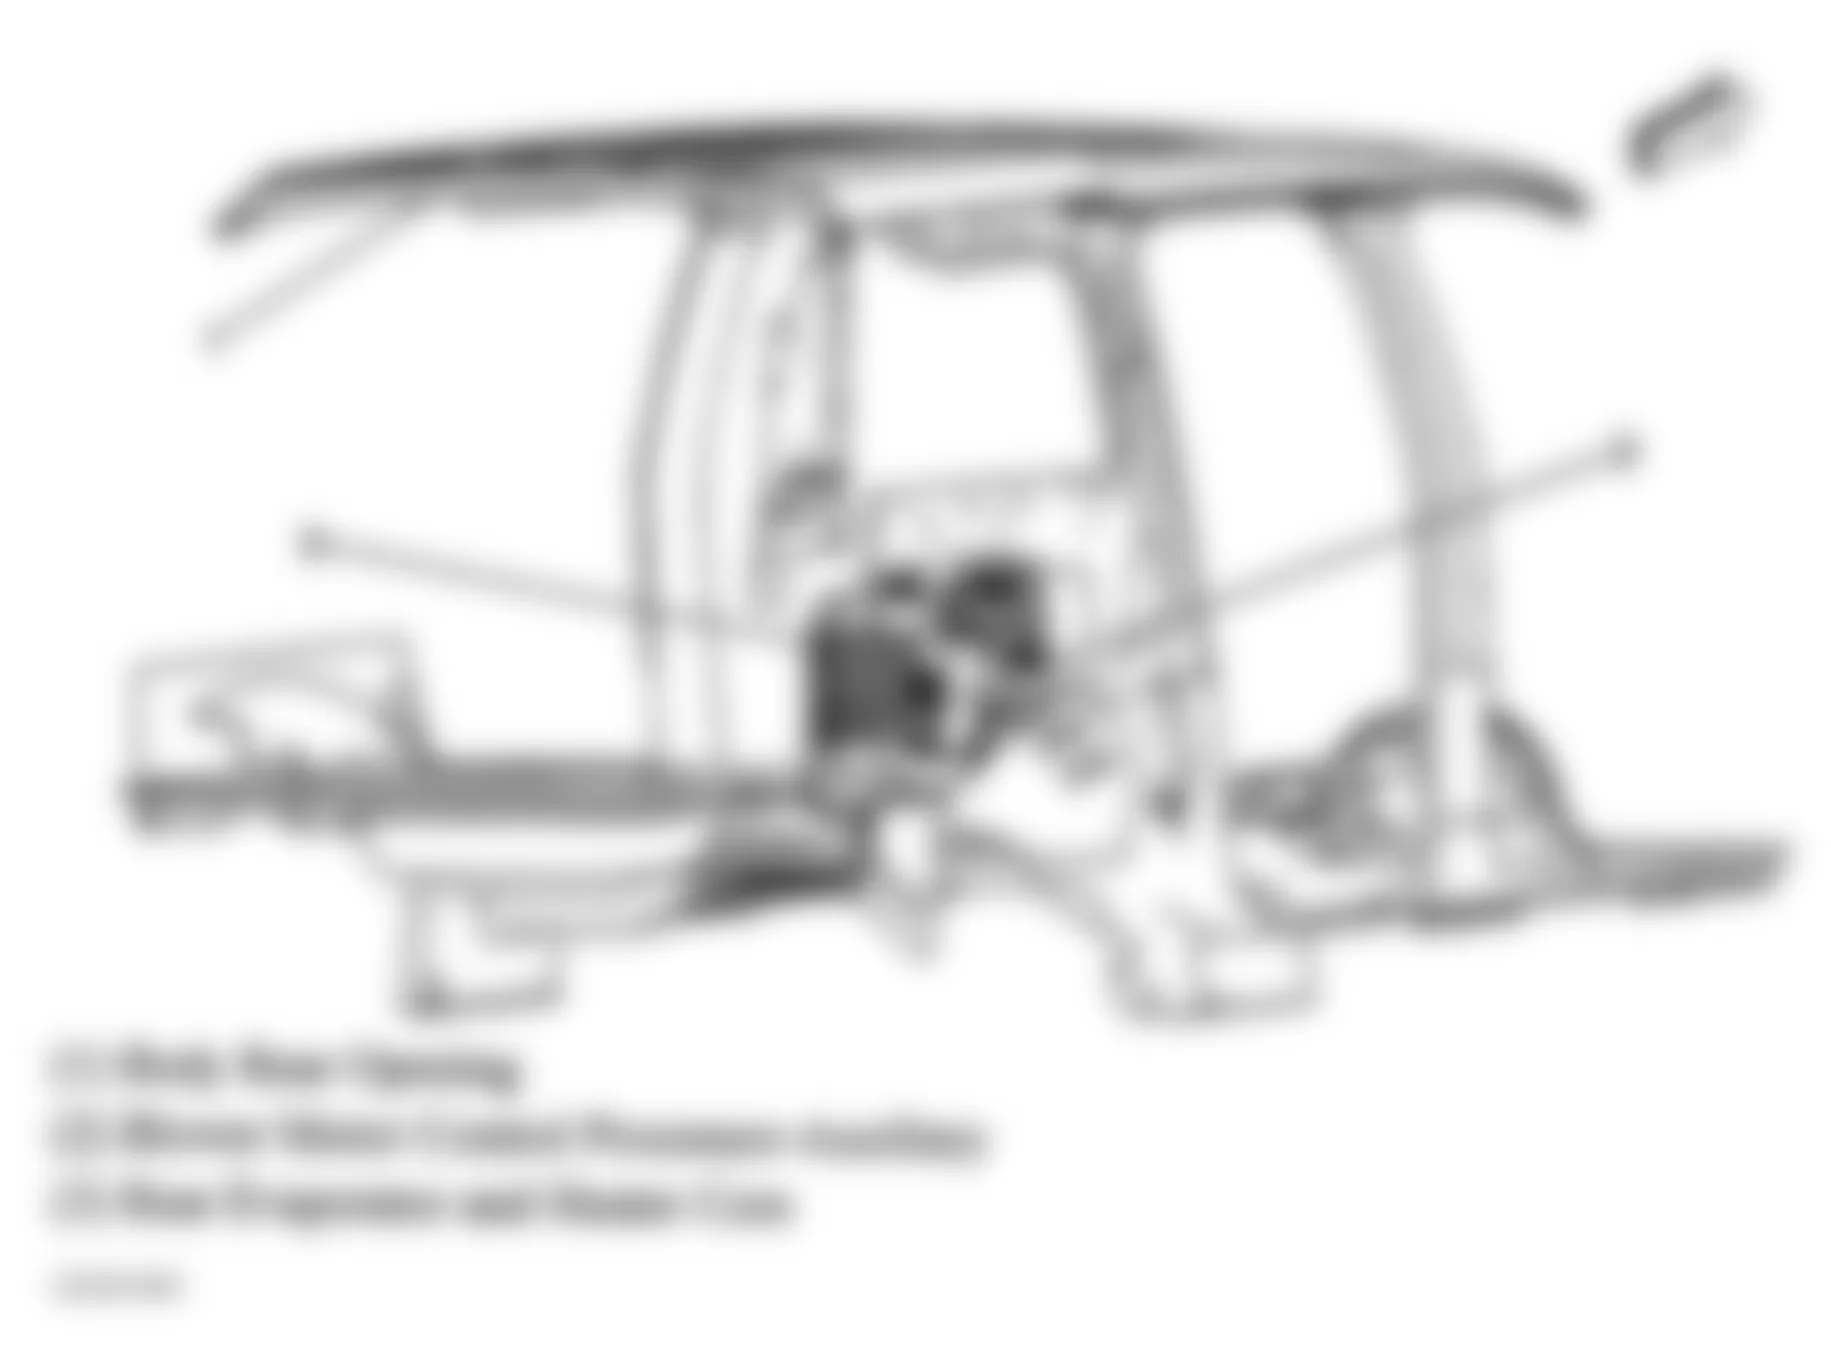 GMC Envoy 2005 - Component Locations -  Right Rear Of Vehicle